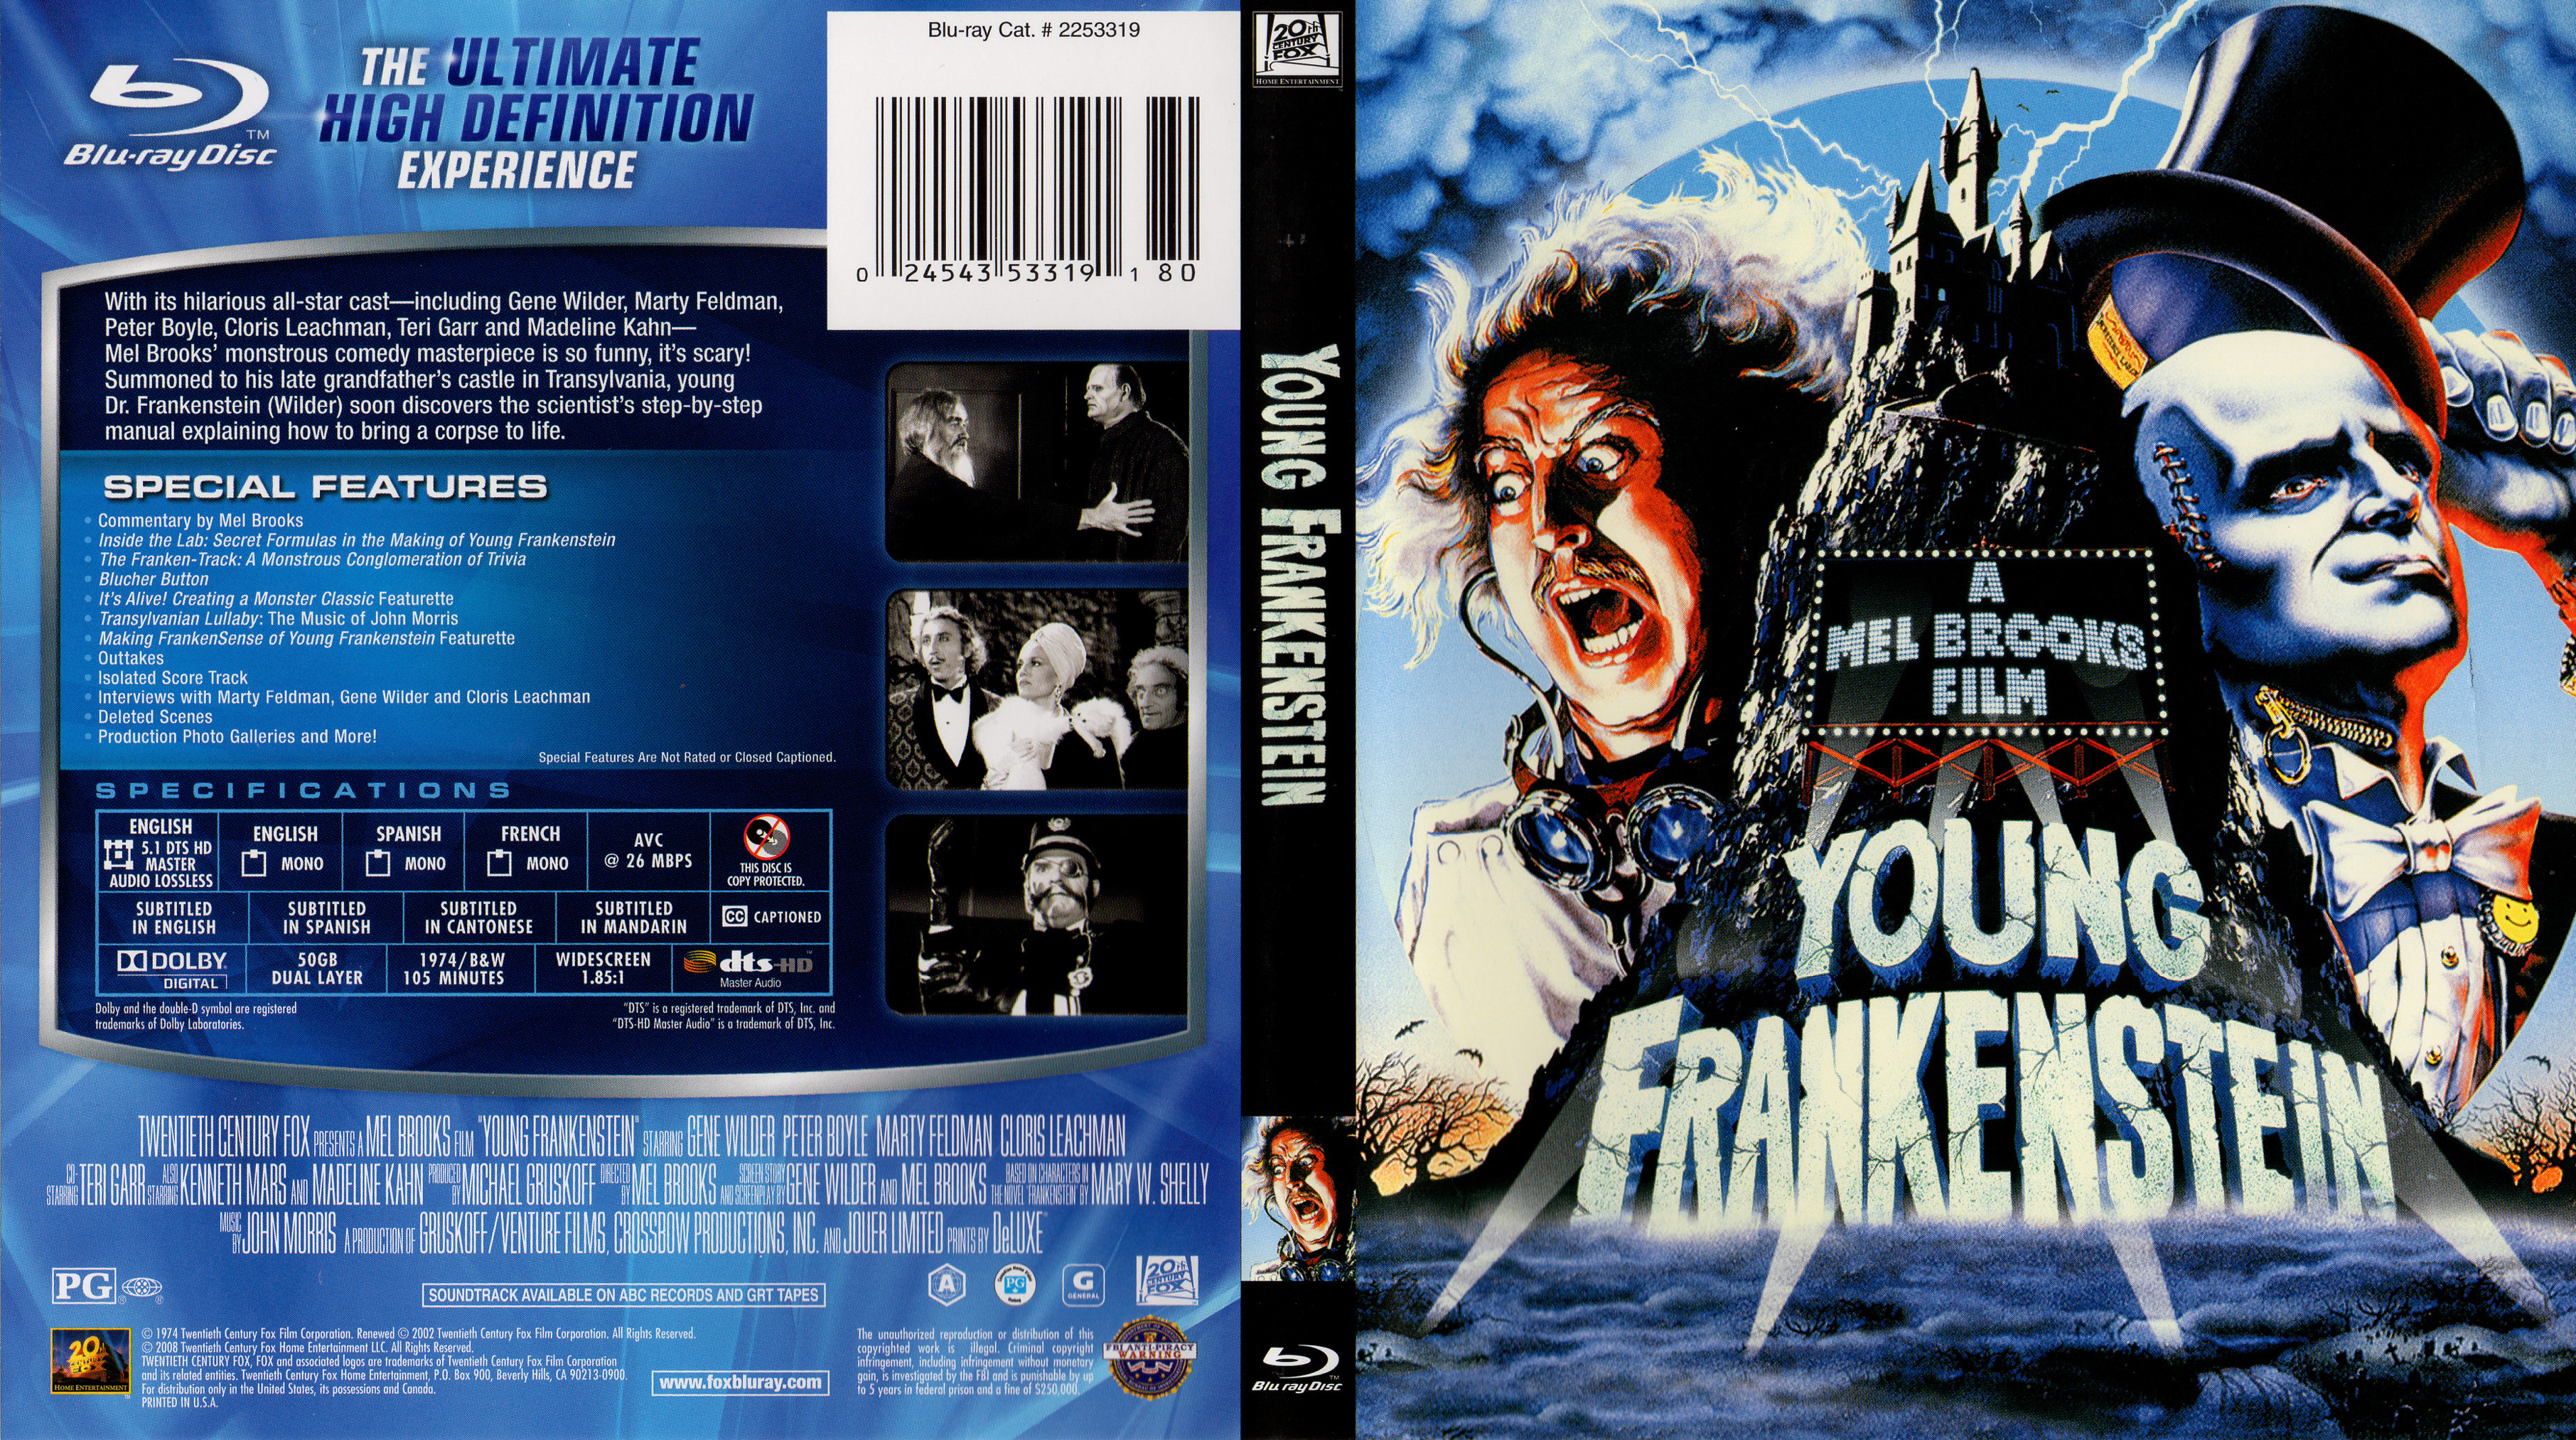 Jaquette DVD Young Frankenstein Zone 1 (BLU-RAY)